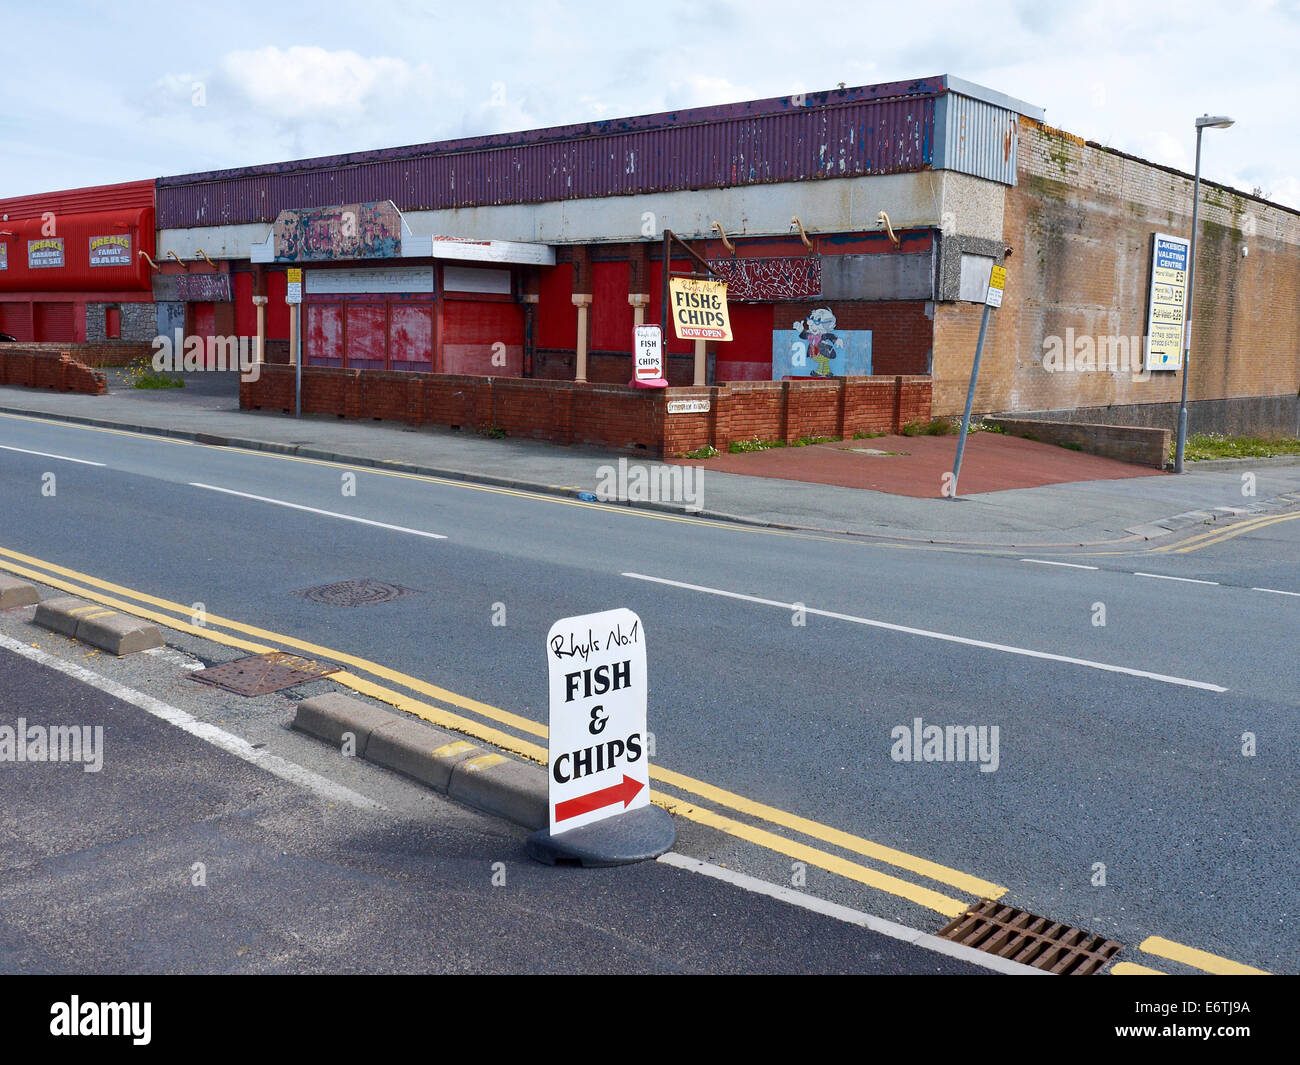 Advert for No1 fish & Chips shop in Rhyl Denbighshire Wales UK Stock Photo